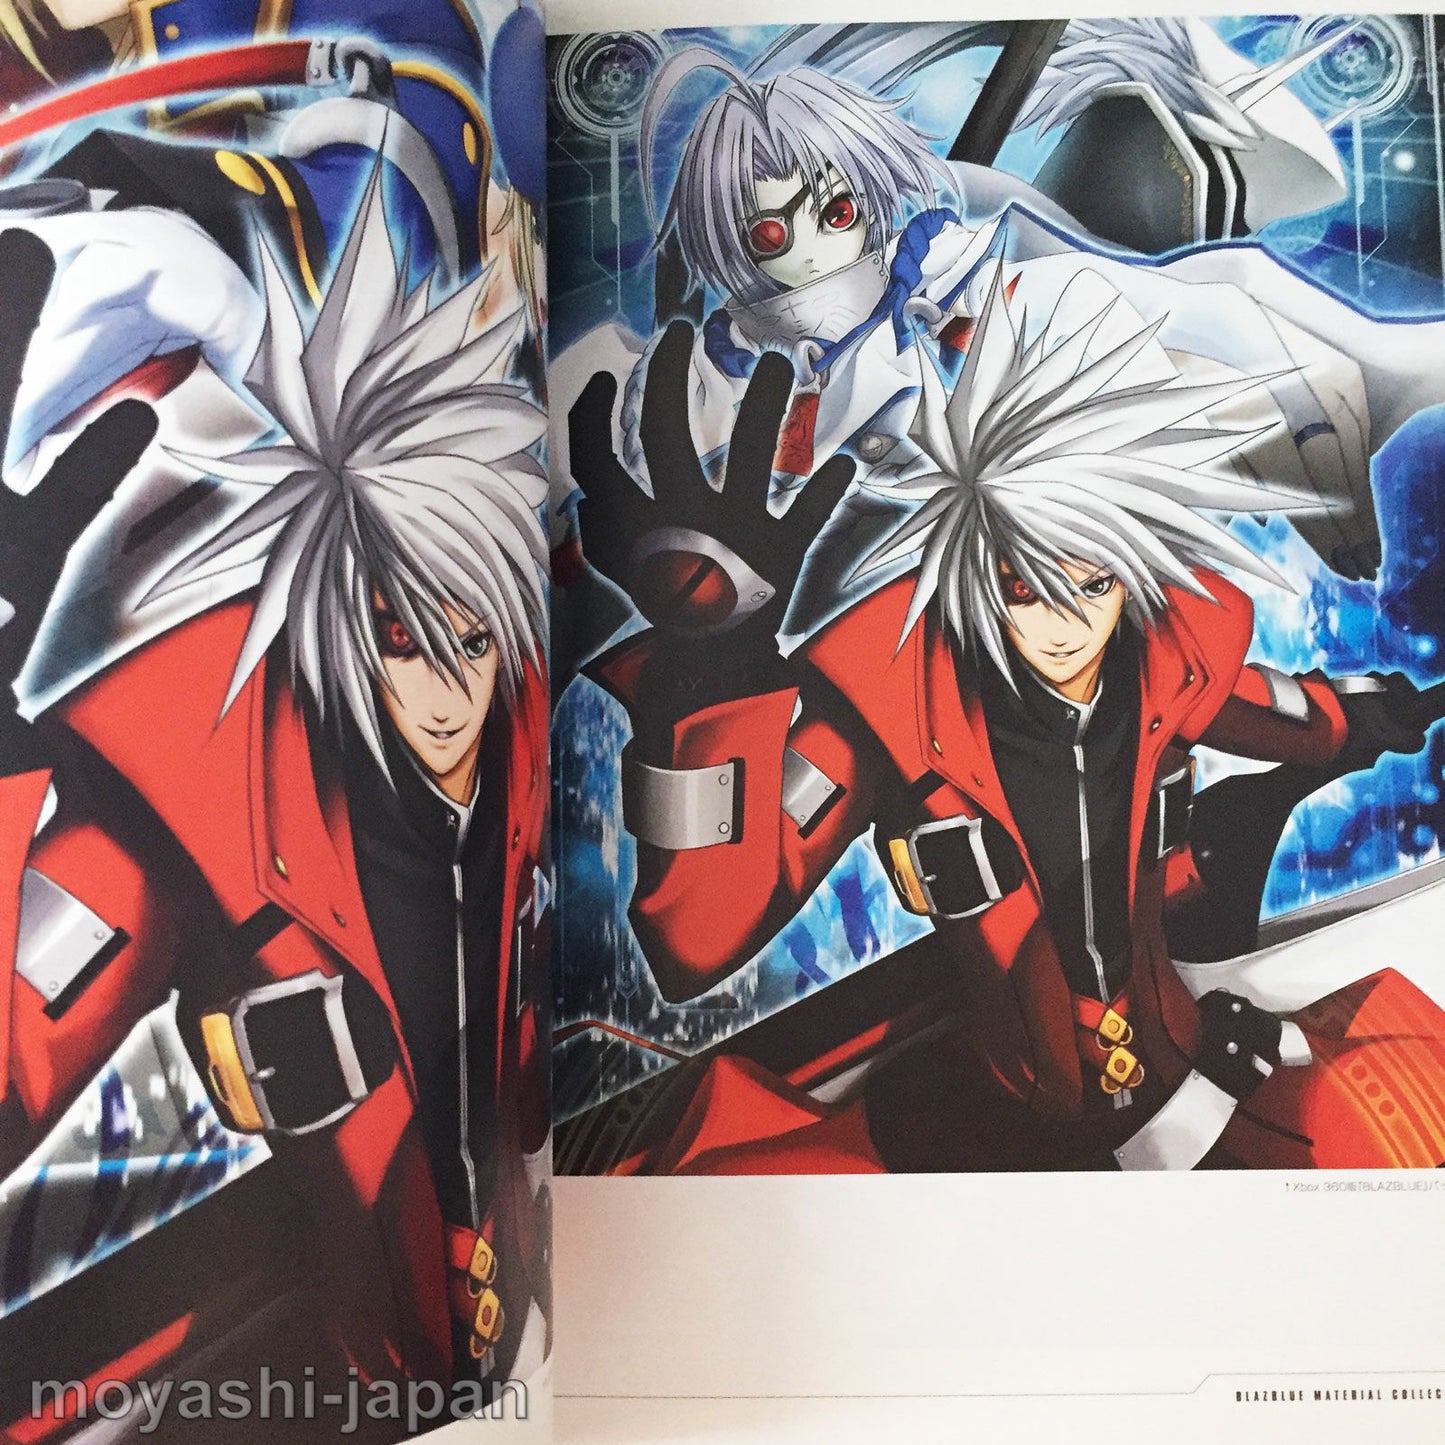 BLAZBLUE Official Material Collection